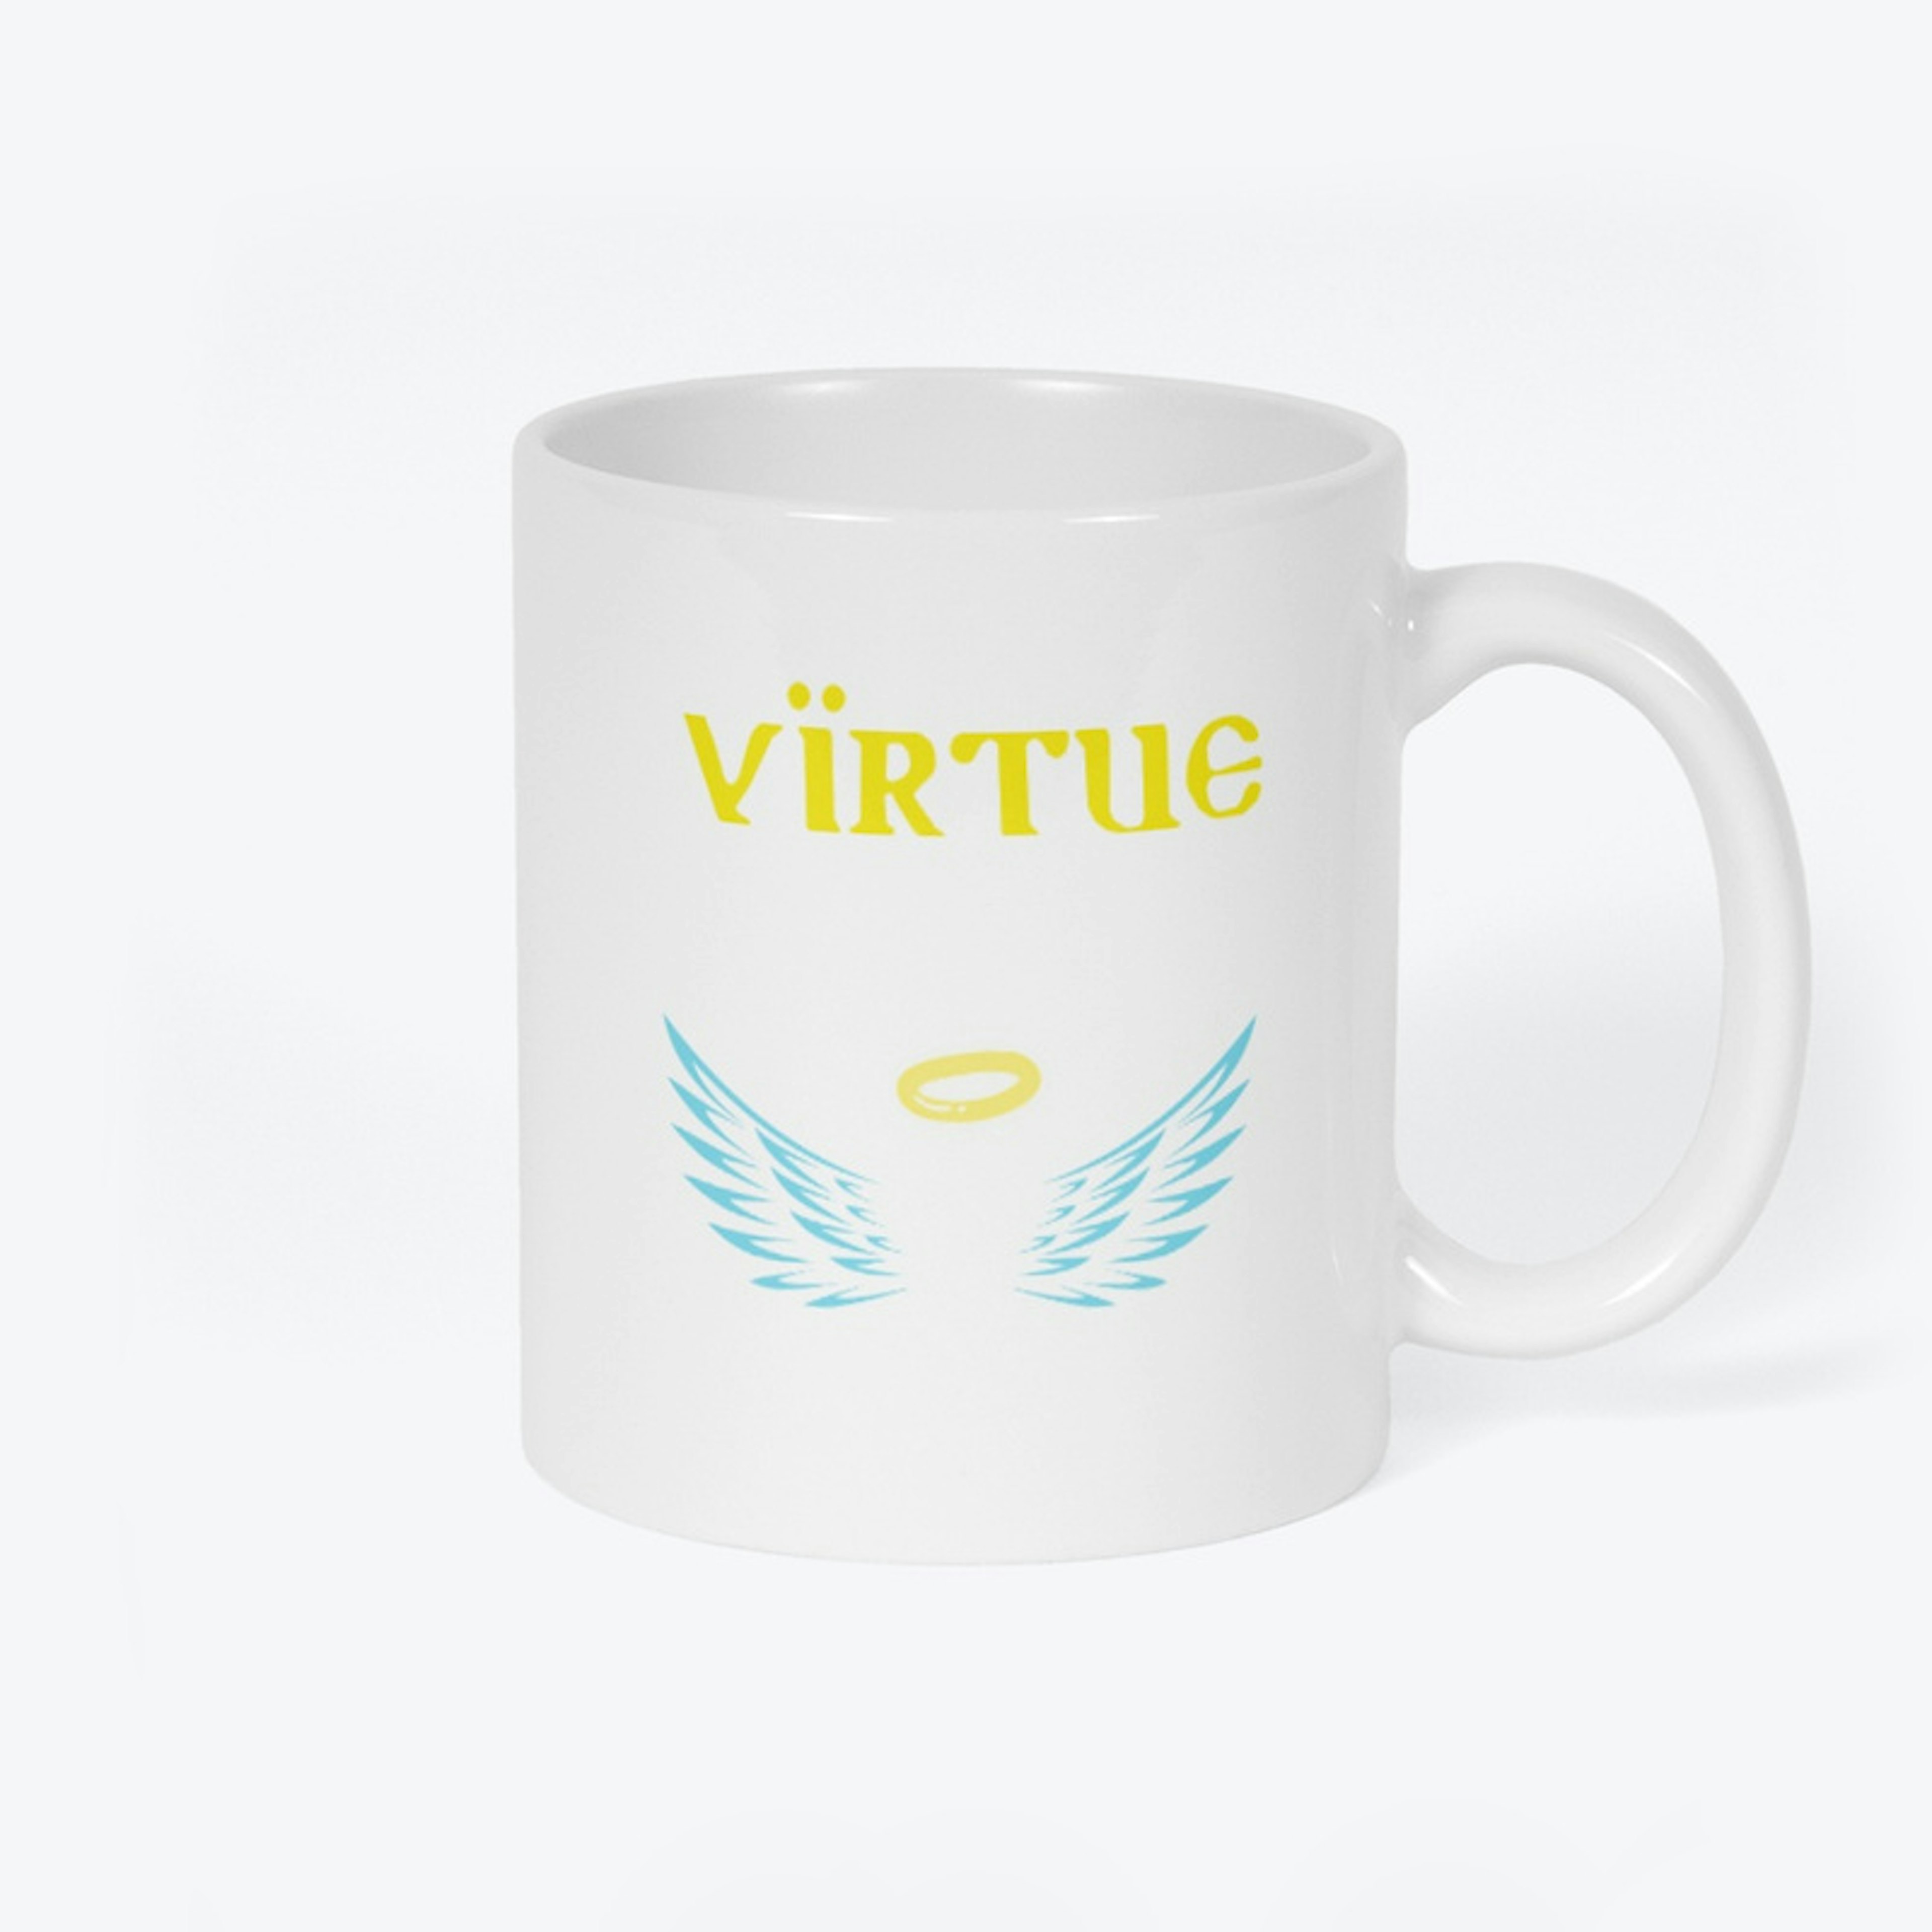 Vice OR Virtue